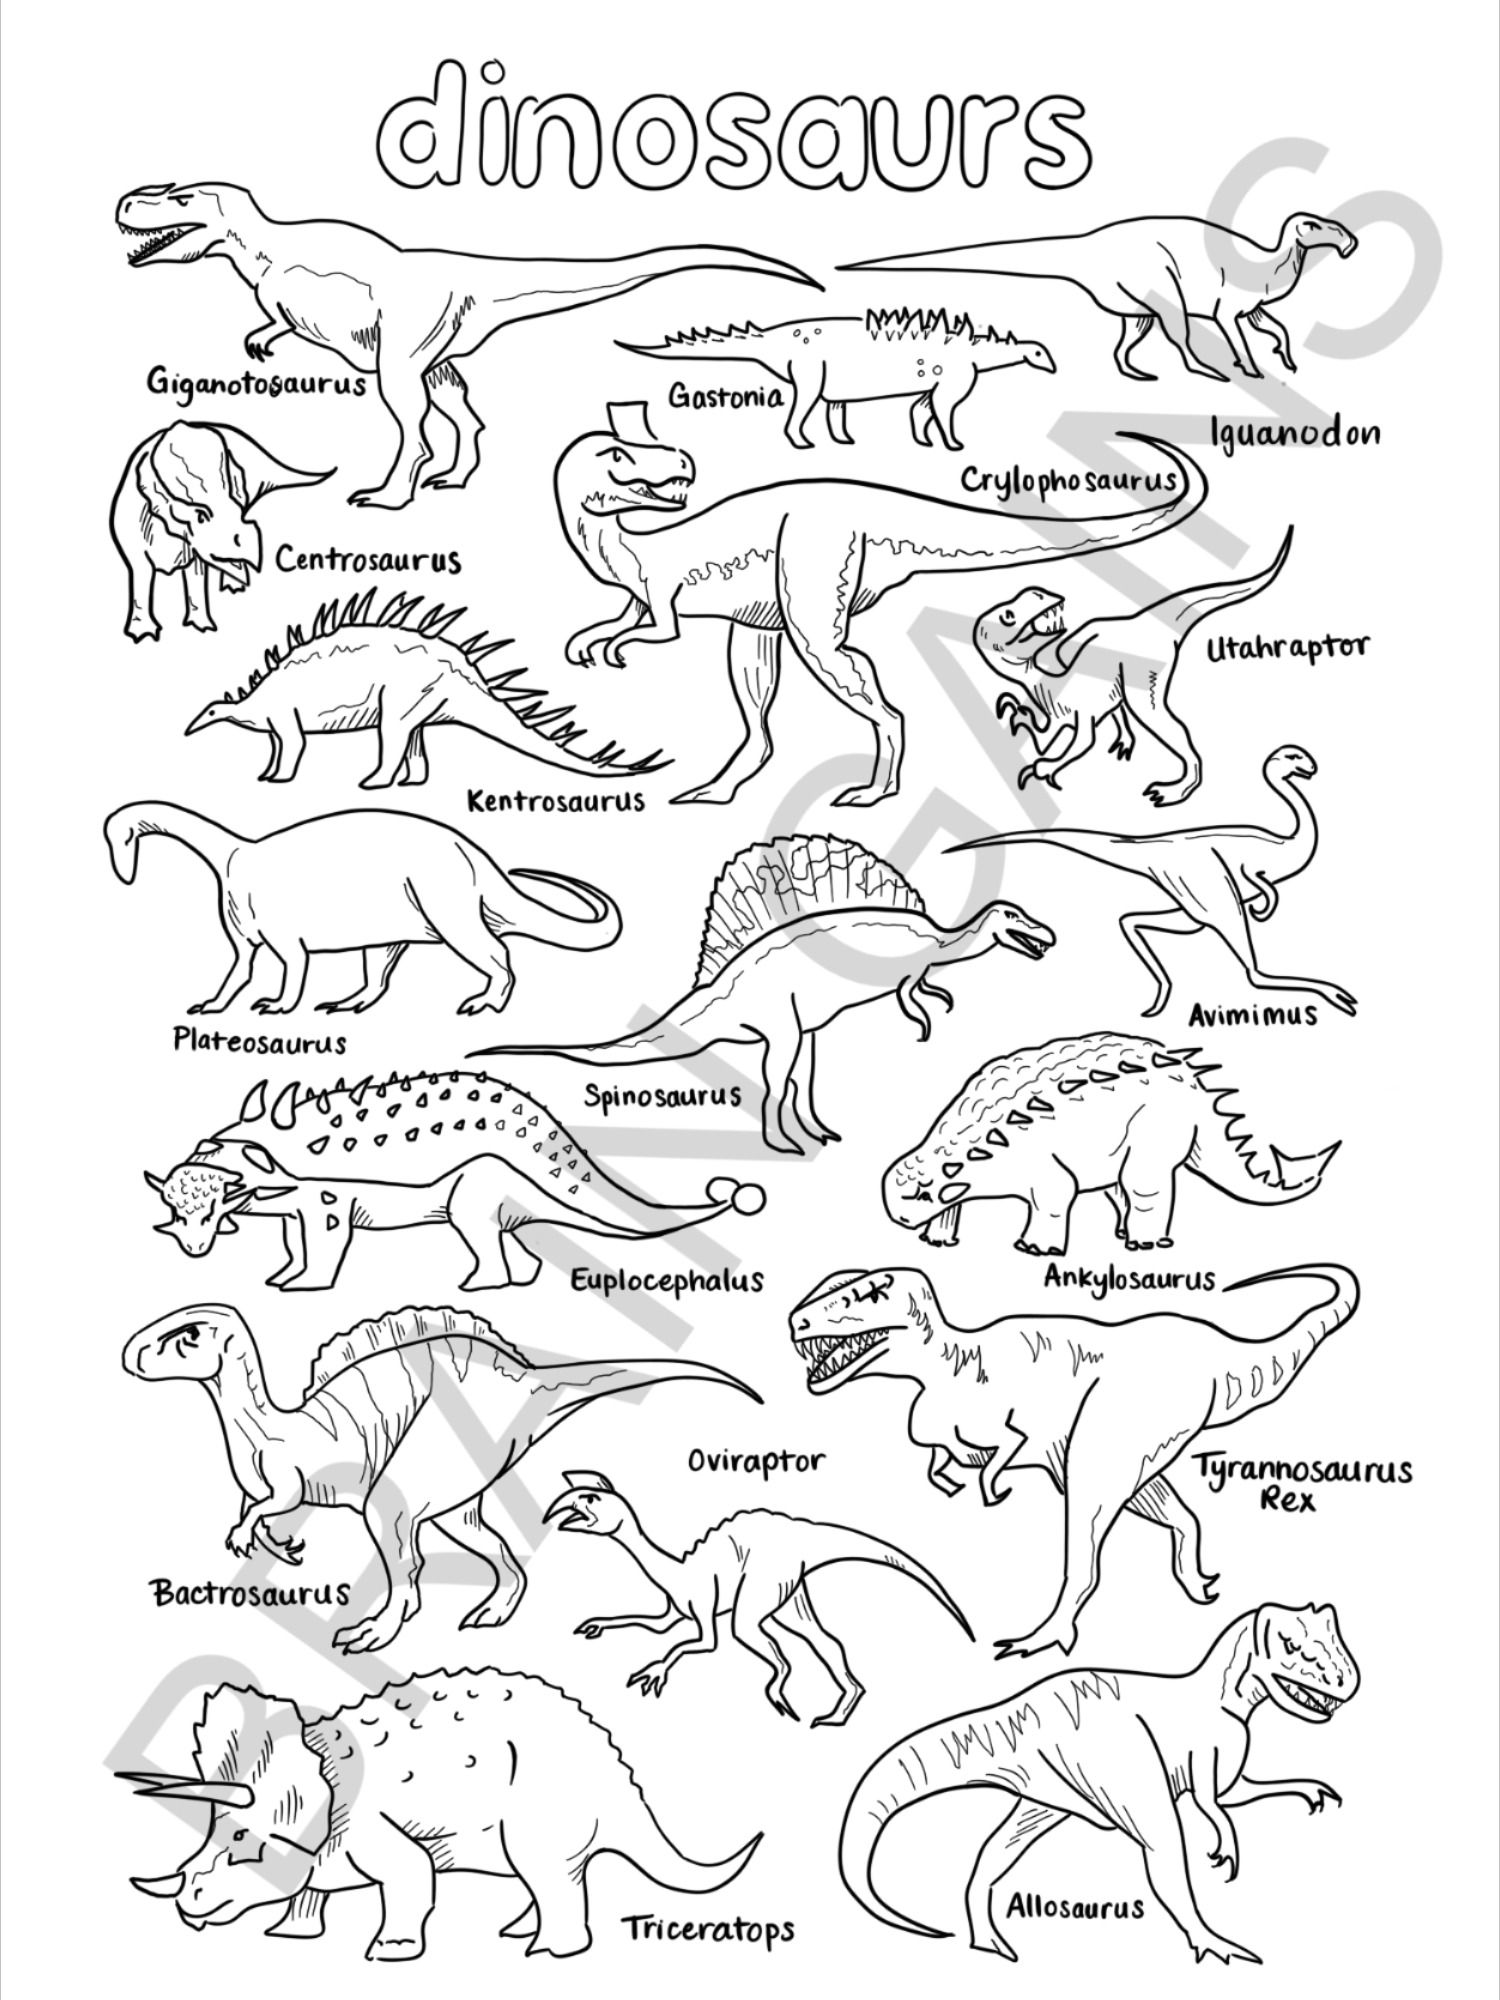 Dinosaurs Coloring Page Digital Download Printable PDF for Kids & Adults